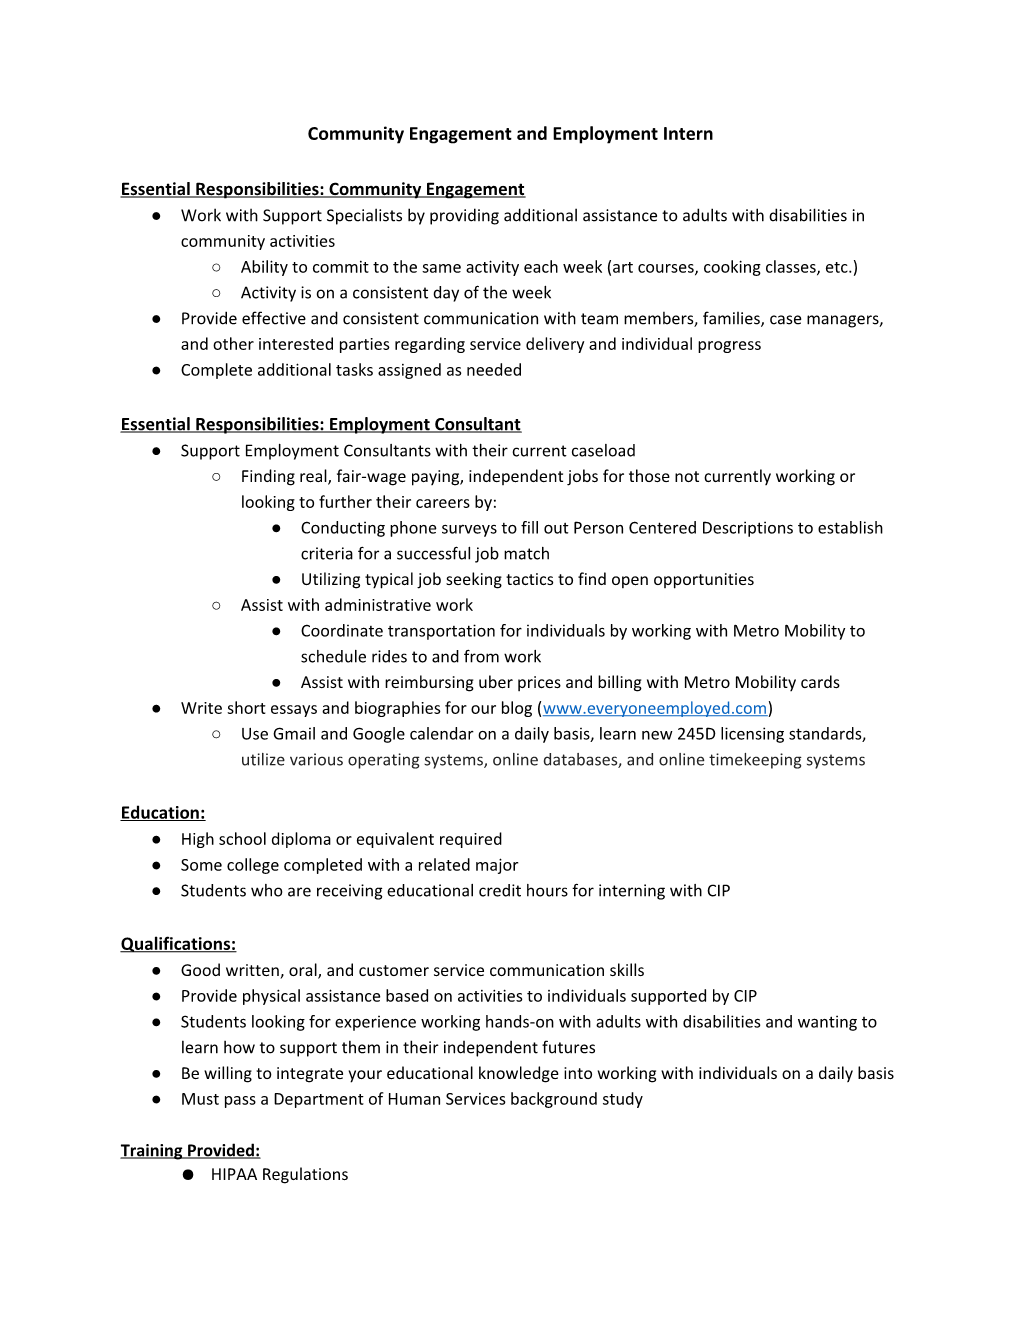 Community Engagement and Employment Intern